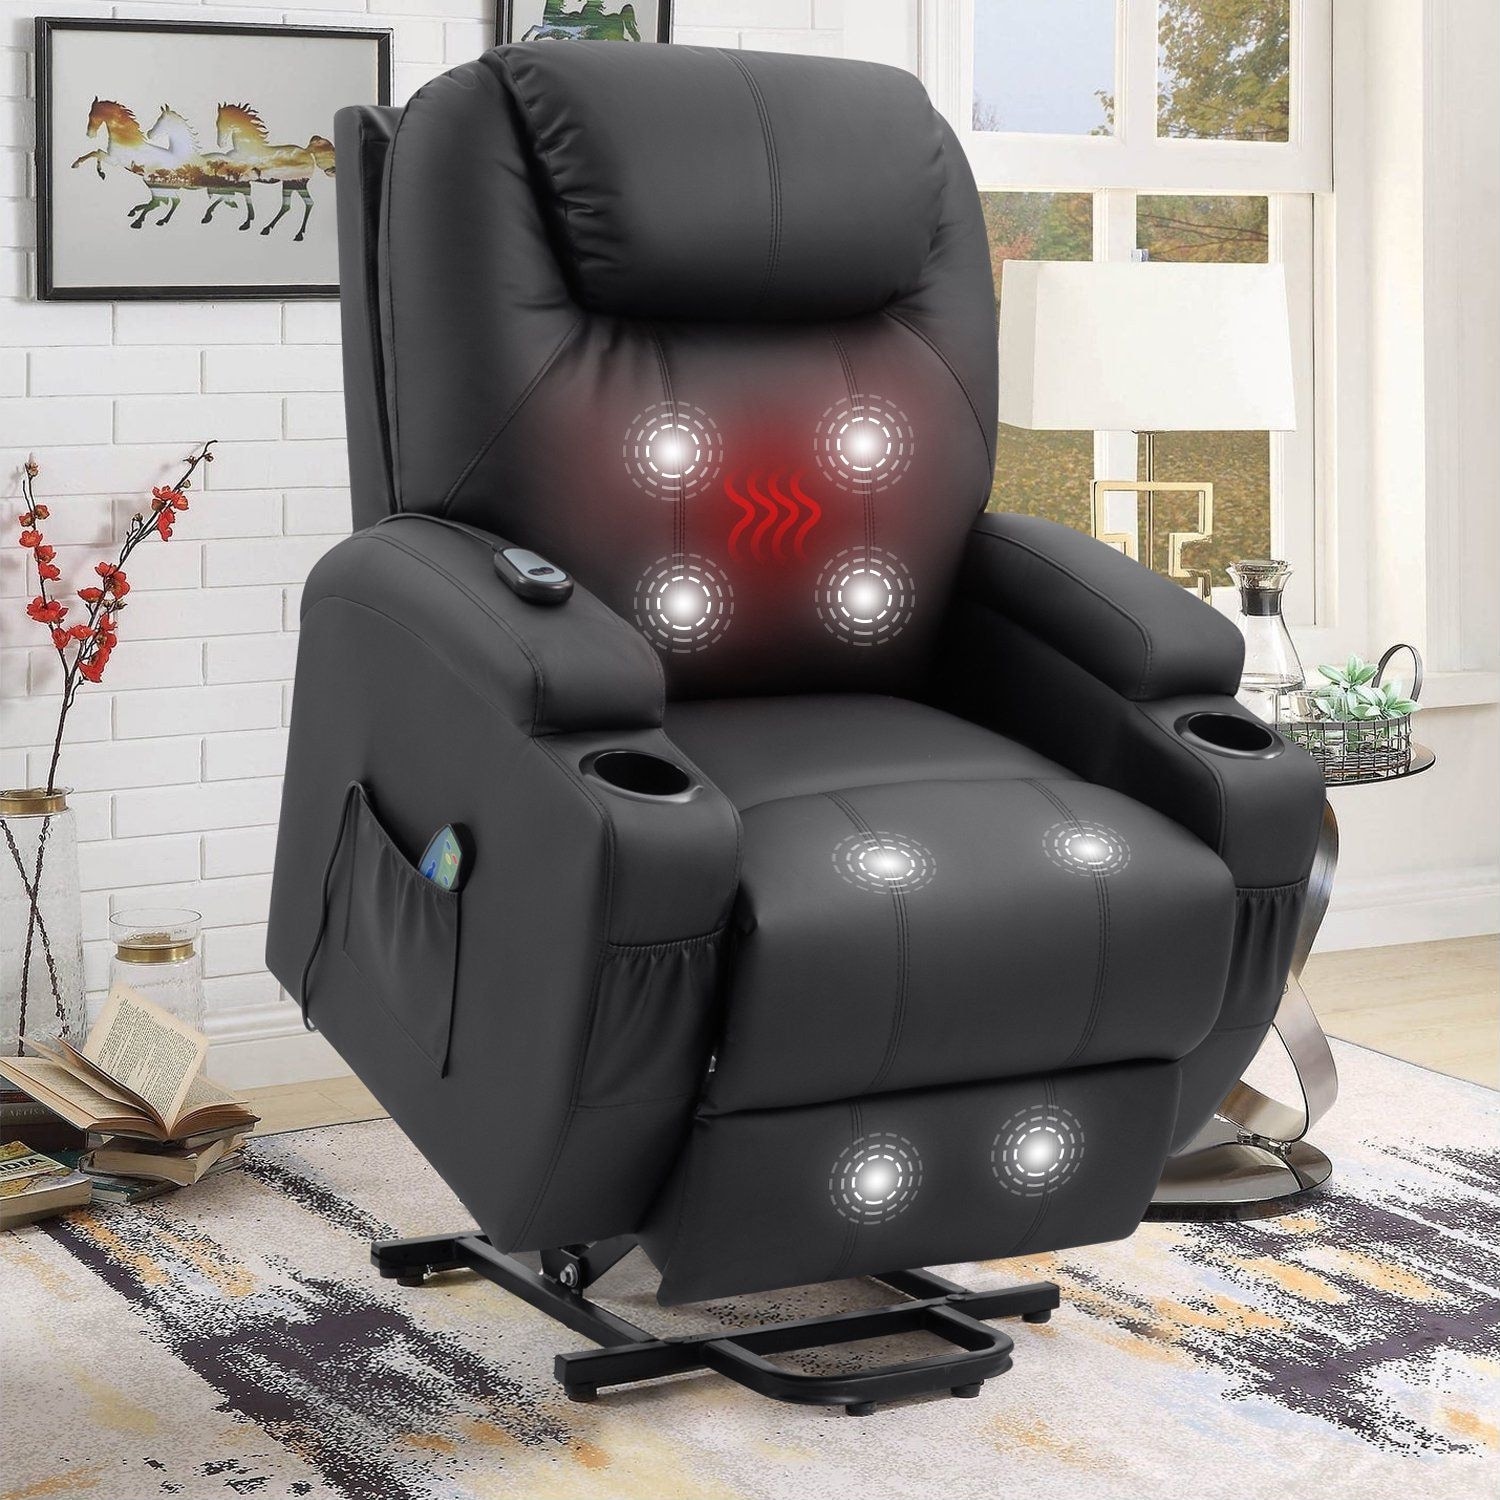 https://ak1.ostkcdn.com/images/products/is/images/direct/44221cd4d1c77c99c488e47870e49743f1329877/Power-Lift-Recliner-with-Massage-and-Heat%2C-Black-Faux-Leather.jpg